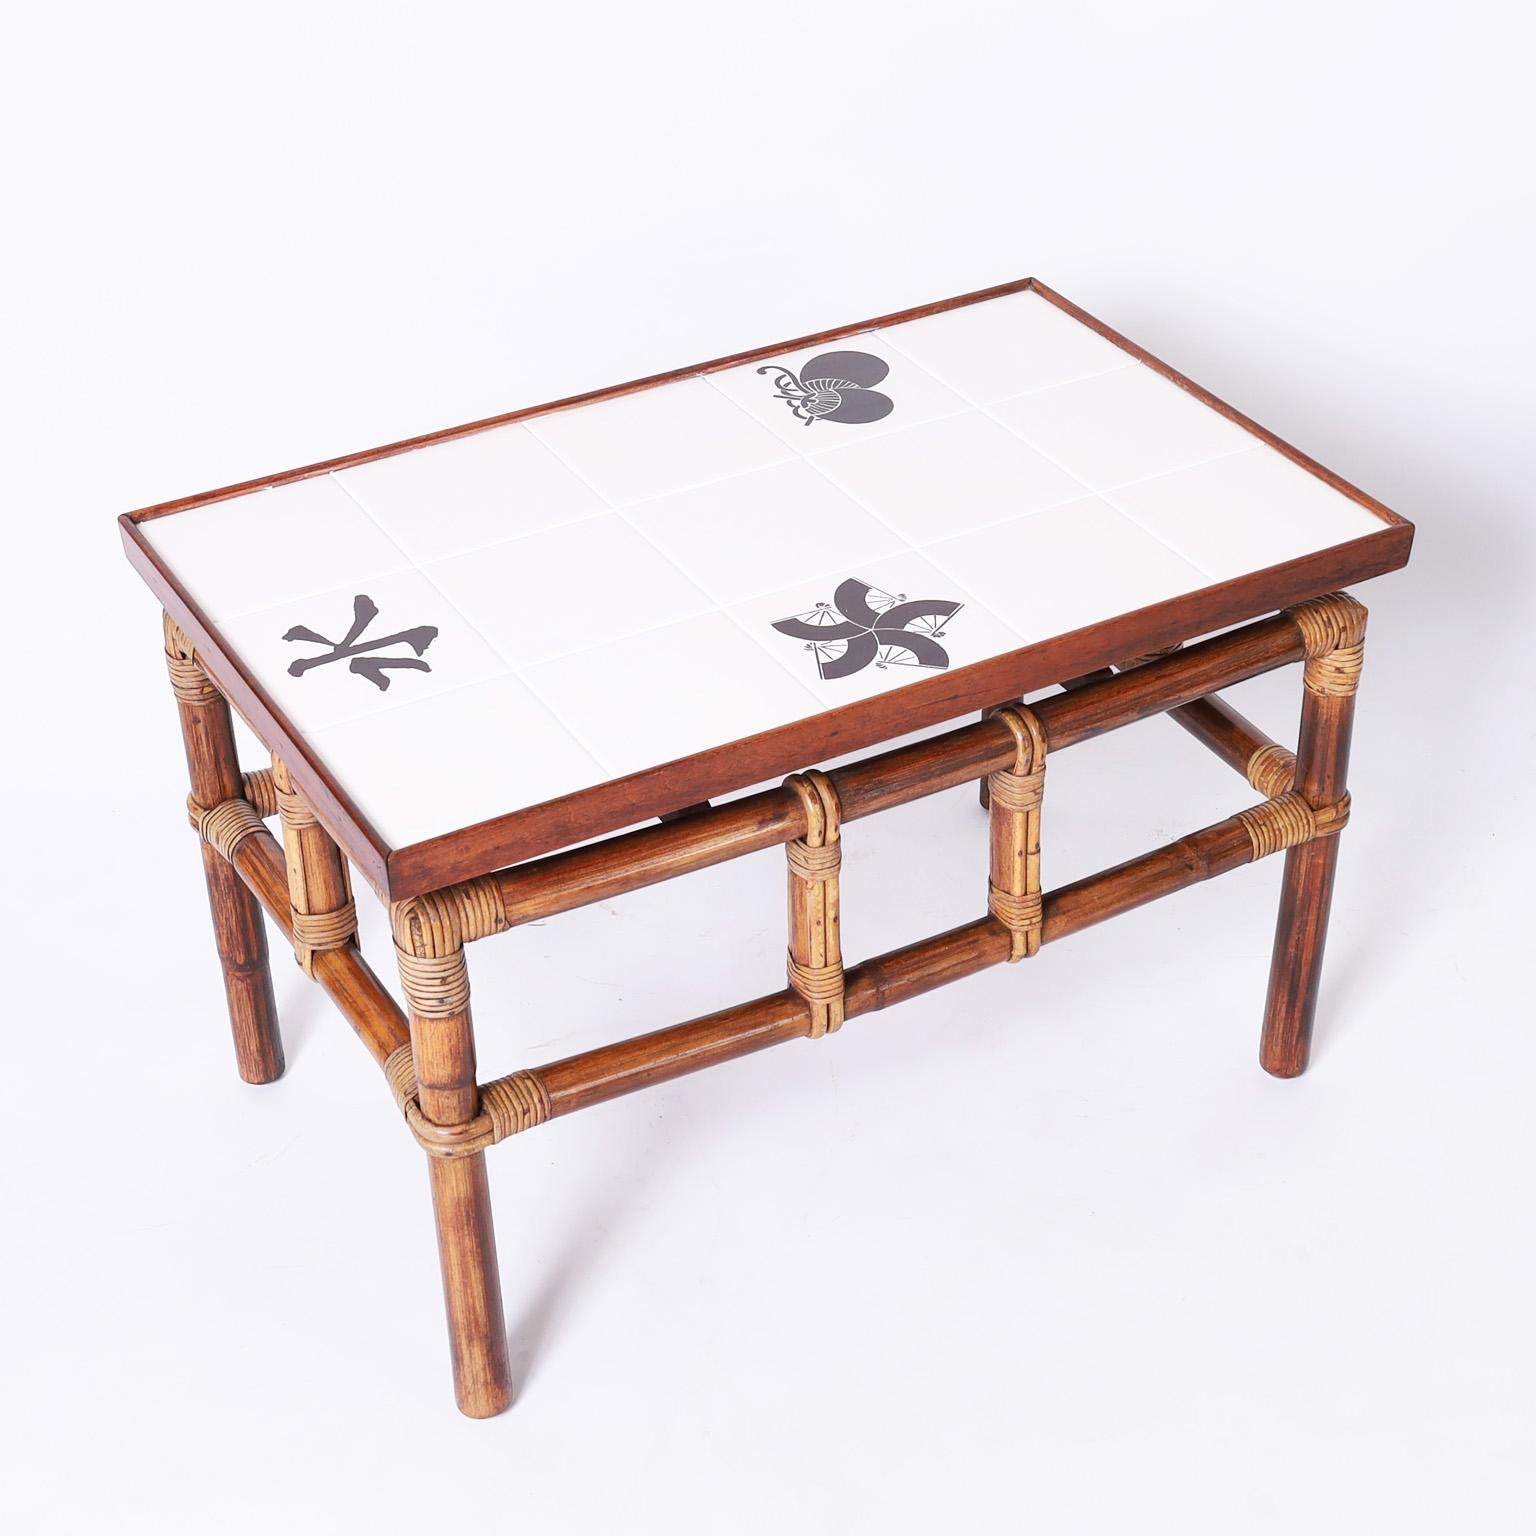 Pair of Bamboo Tile Top Tables or Stands In Good Condition For Sale In Palm Beach, FL